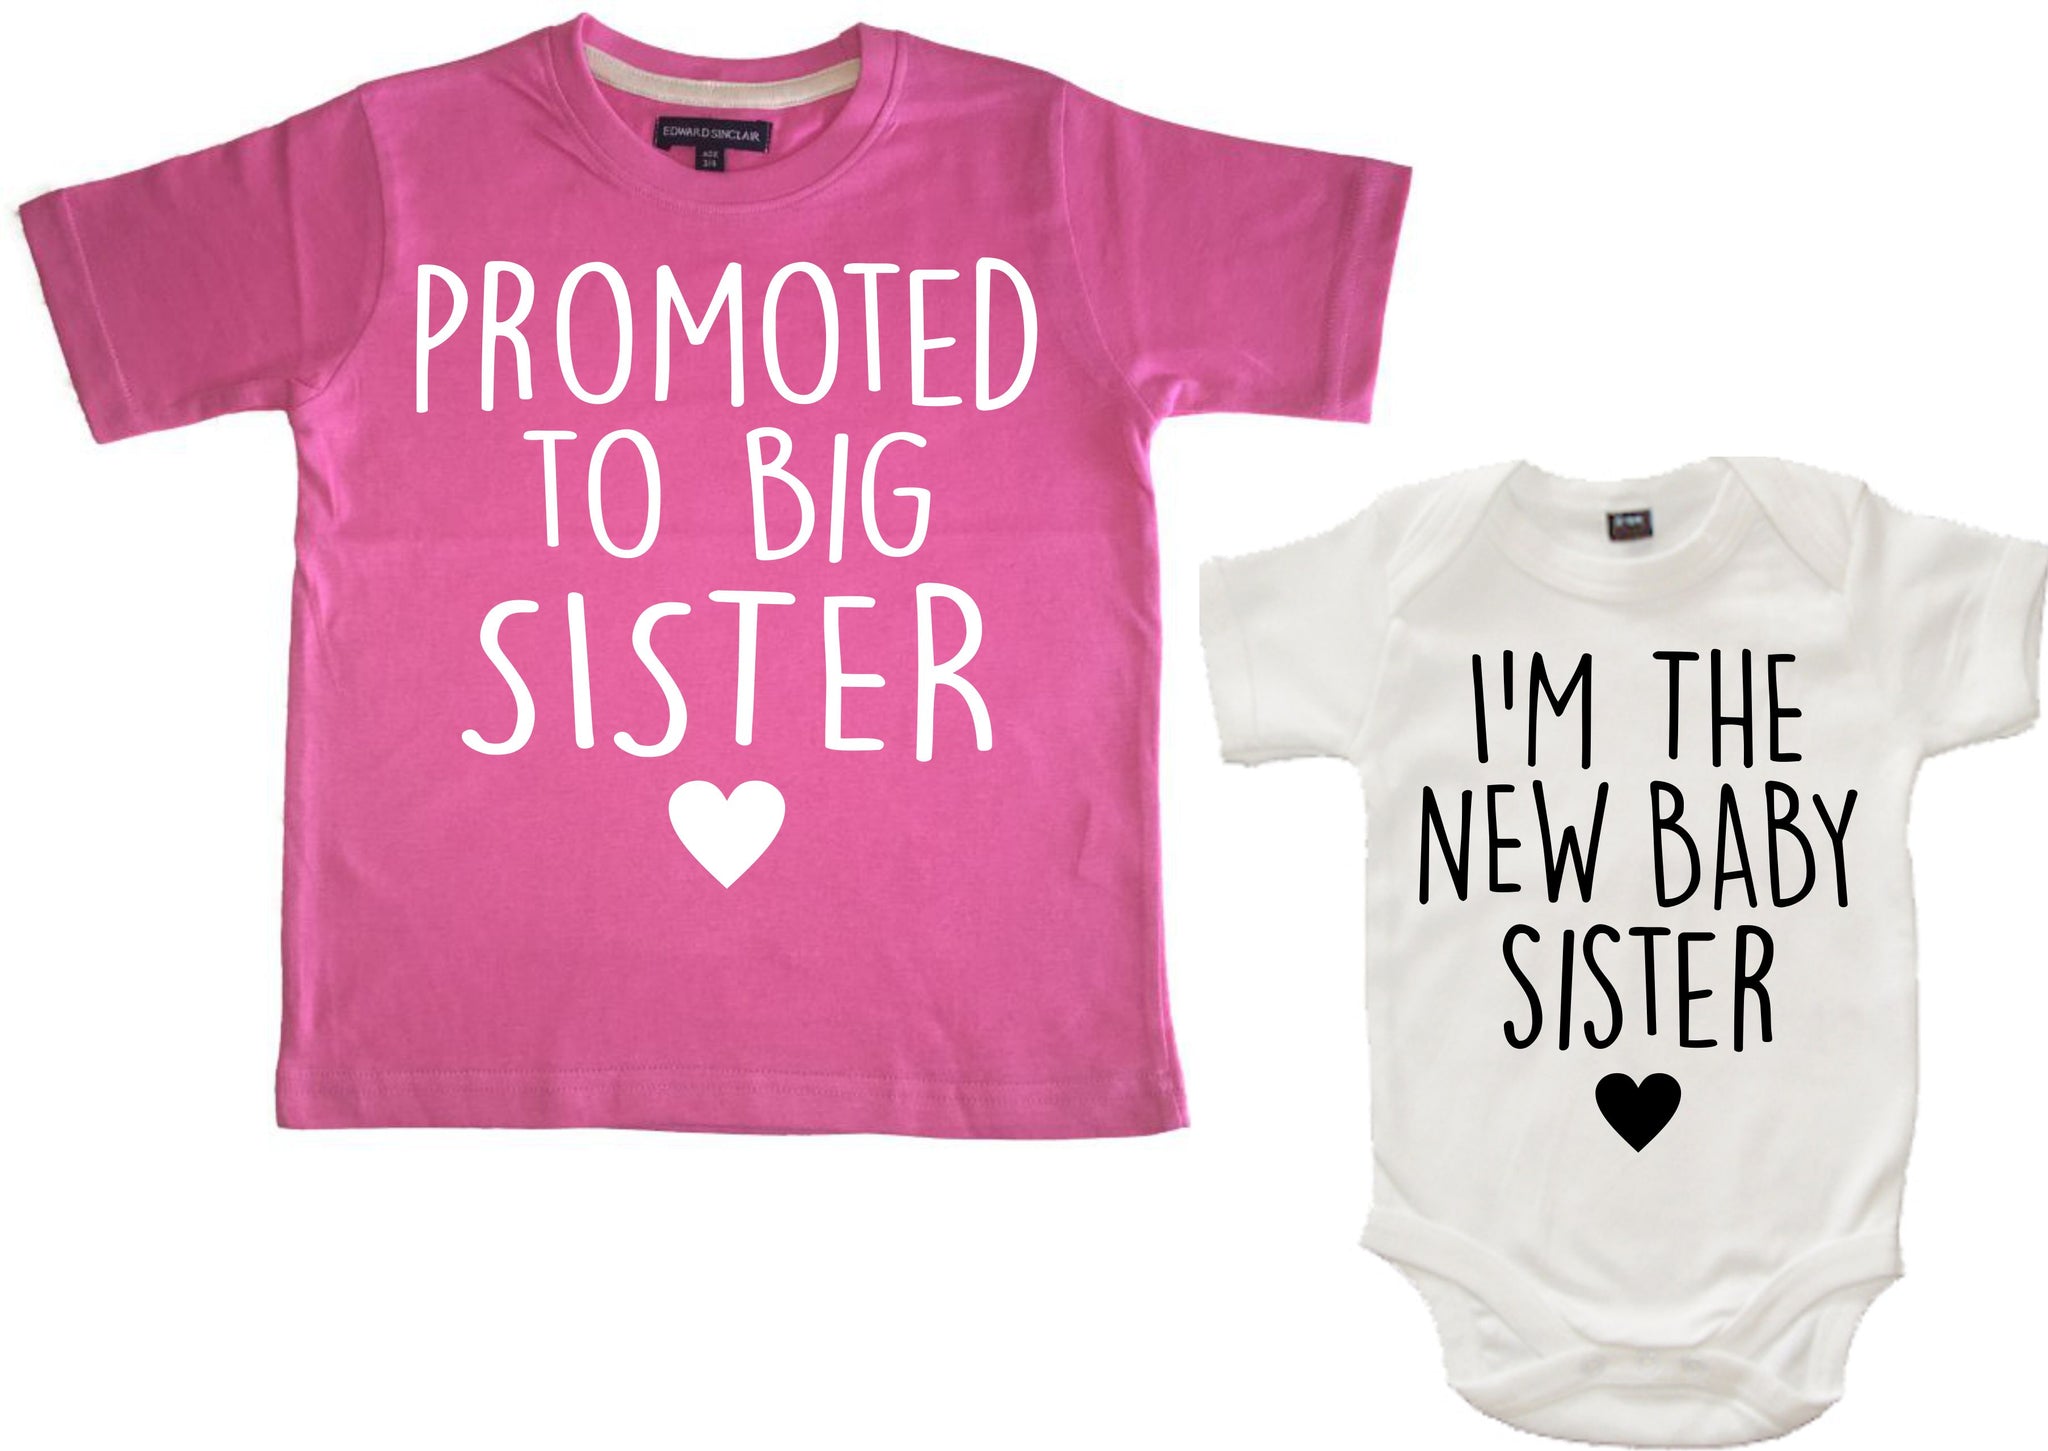 Promoted to Big Sister Bubblegum Pink T-Shirt and New Baby Sister White Bodysuit Set